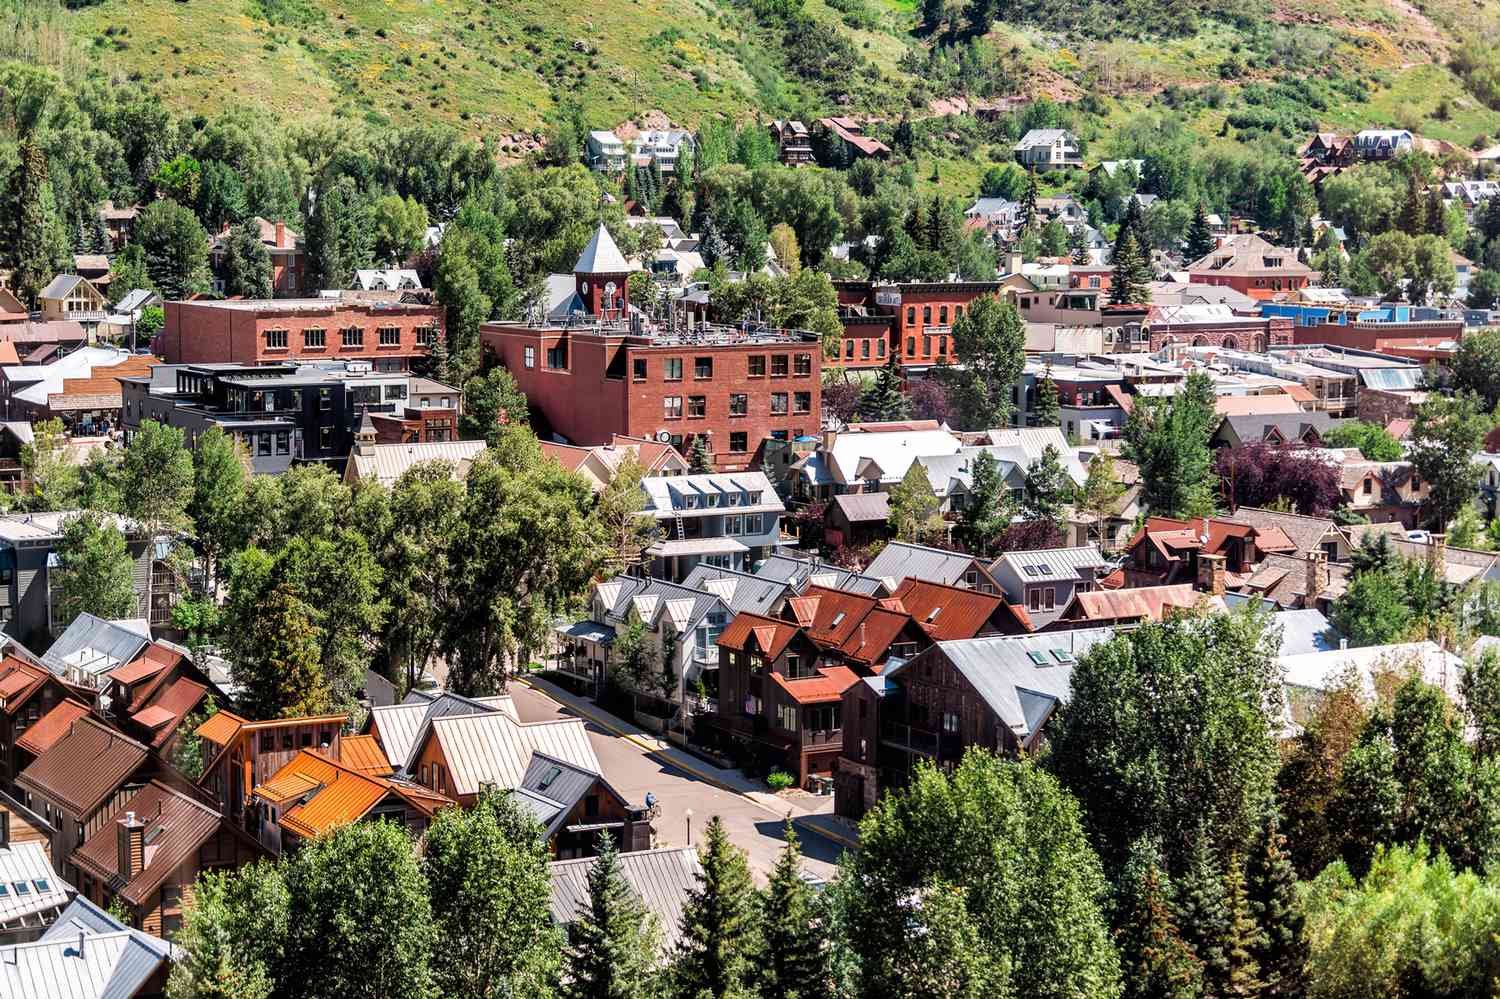 16 of the Best Small Towns in America